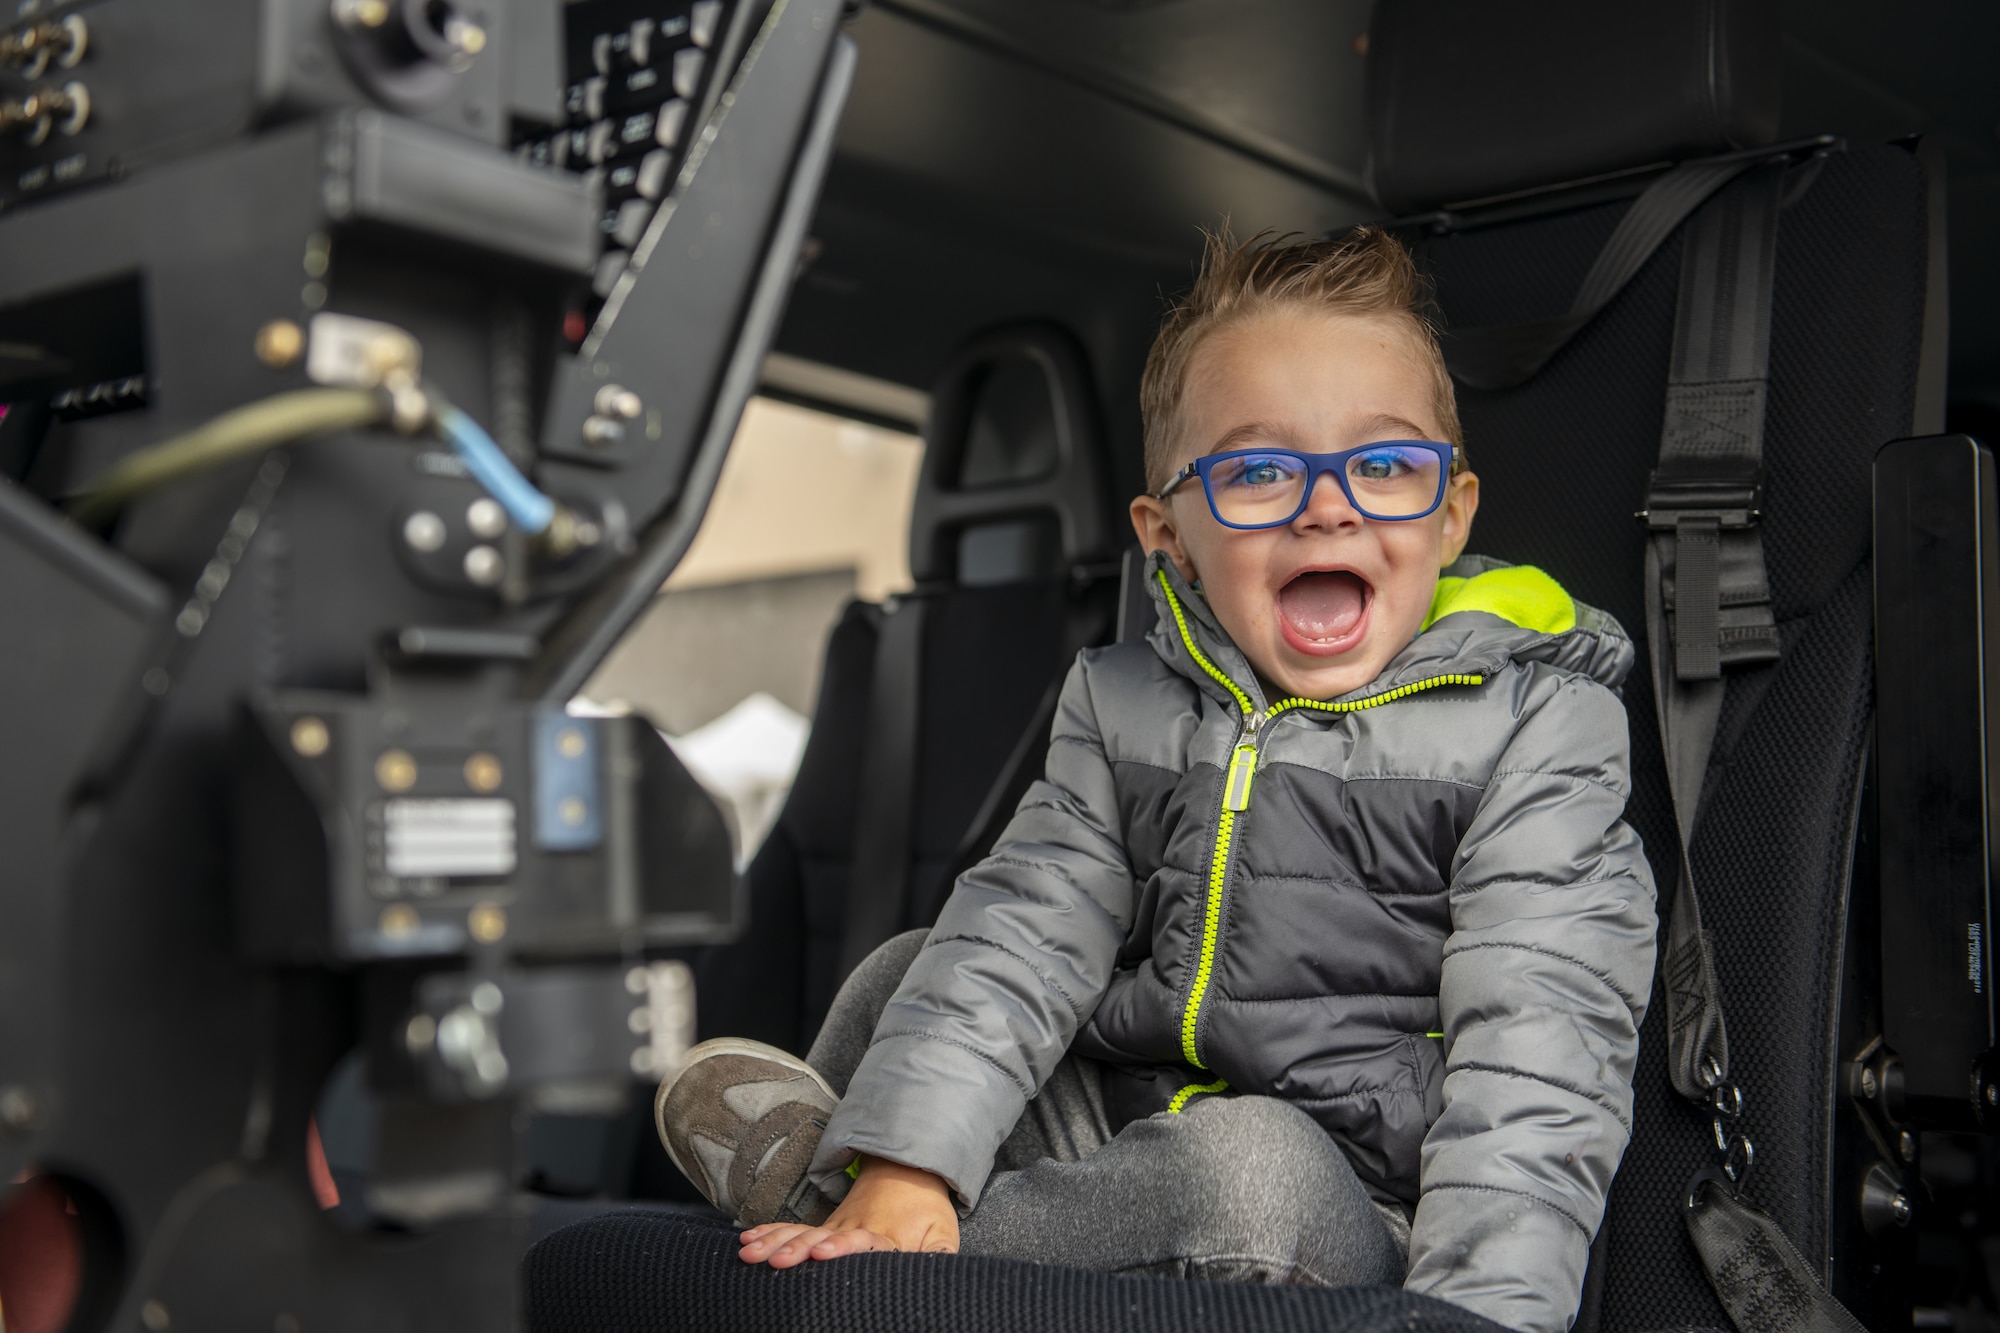 An airshow attendee sits inside a static display during the Fairchild Skyfest 2022 at Fairchild Air Force Base, Washington, May 15, 2022. Team Fairchild held the Fairchild Skyfest 2022 airshow as a means of thanking the local community for their support and partnerships, as well as to inspire future generations of Airmen with a showcase of U.S. Air Force assets and their capabilities. (U.S. Air Force photo by Staff Sgt. Lawrence Sena)